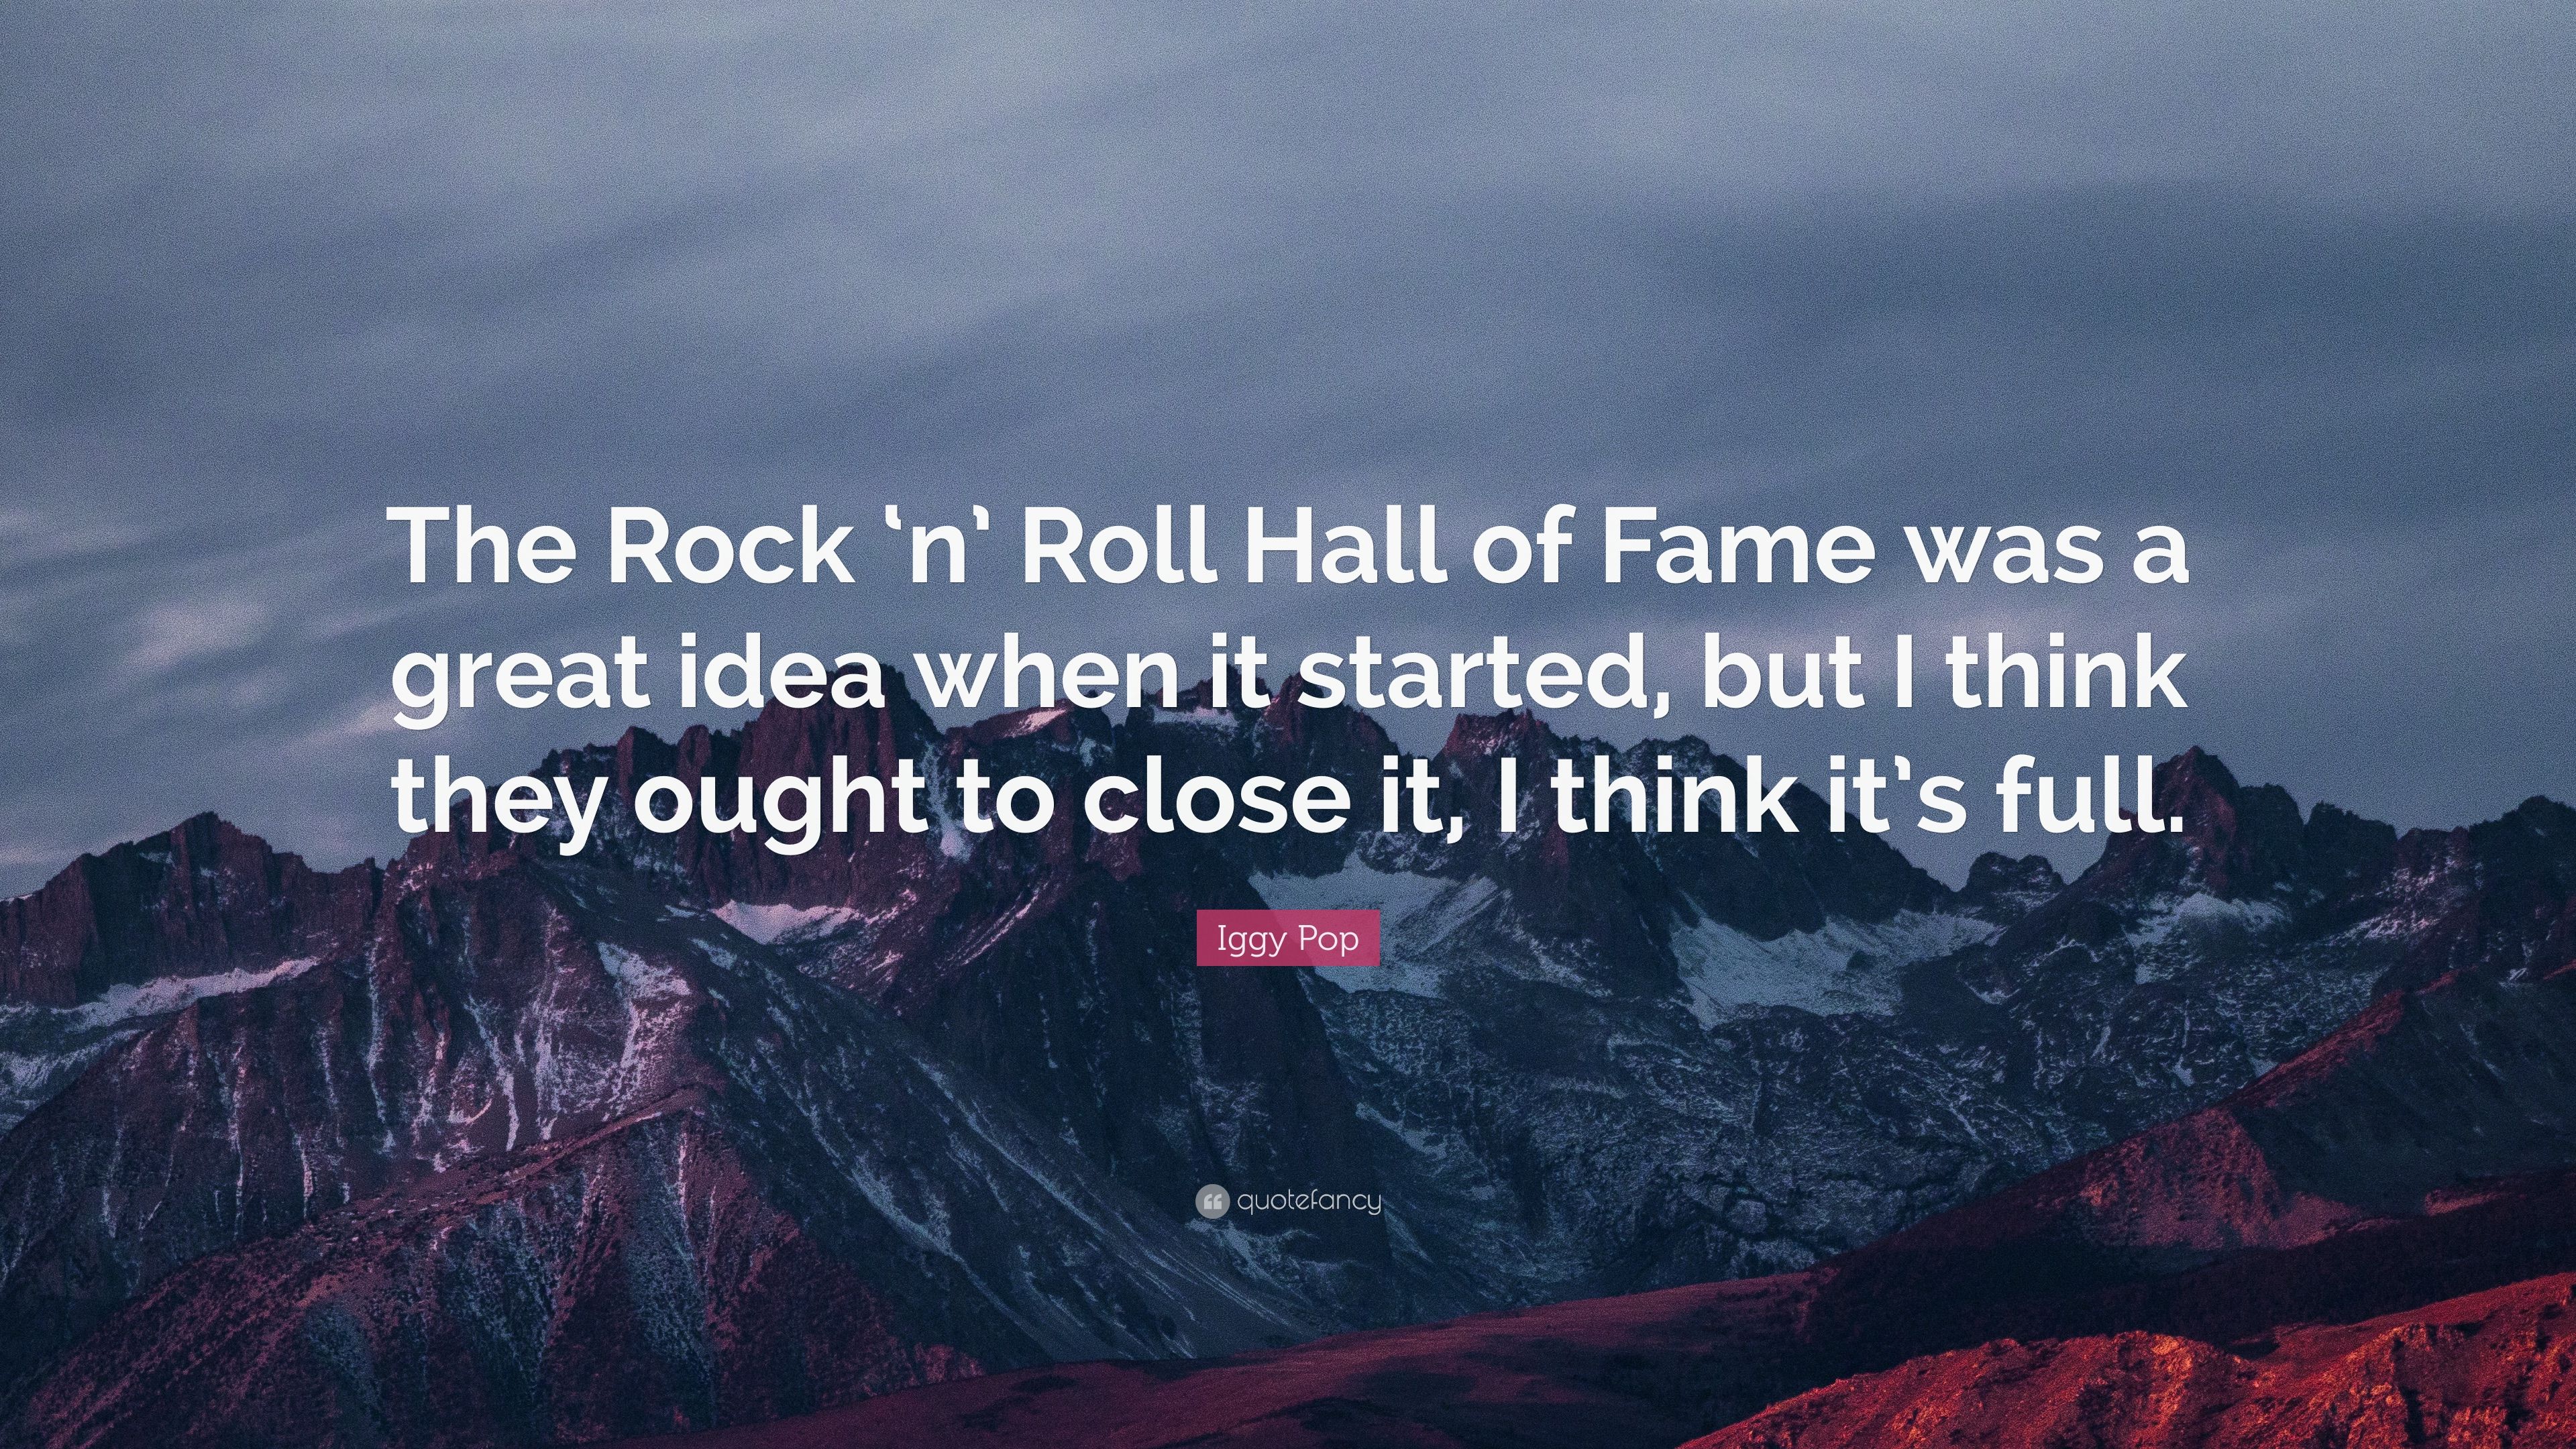 Iggy Pop Quote: “The Rock 'n' Roll Hall of Fame was a great idea